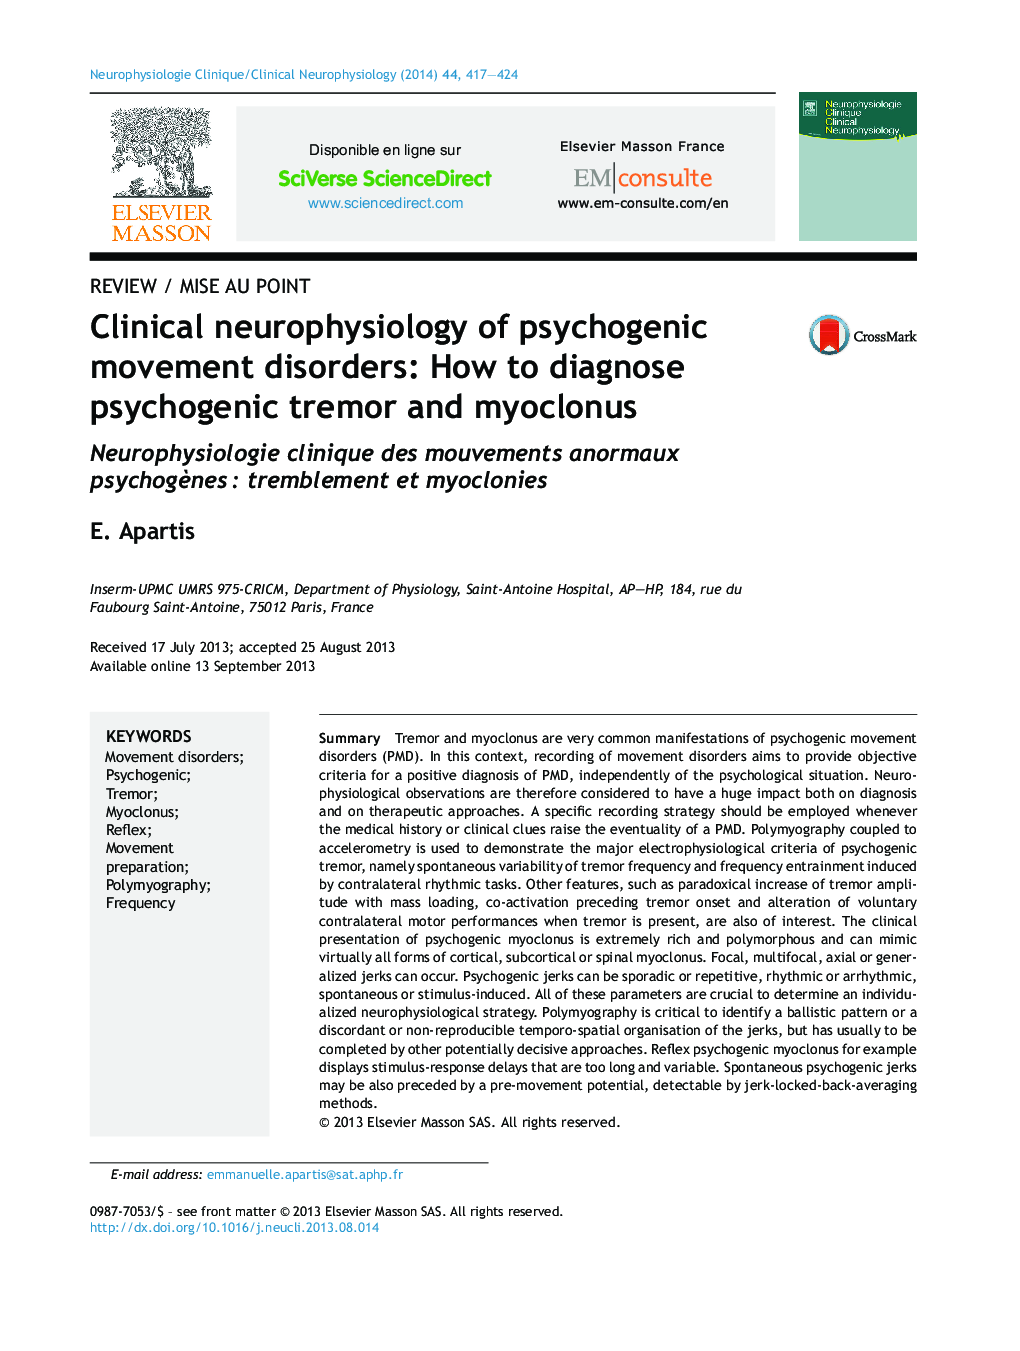 Clinical neurophysiology of psychogenic movement disorders: How to diagnose psychogenic tremor and myoclonus